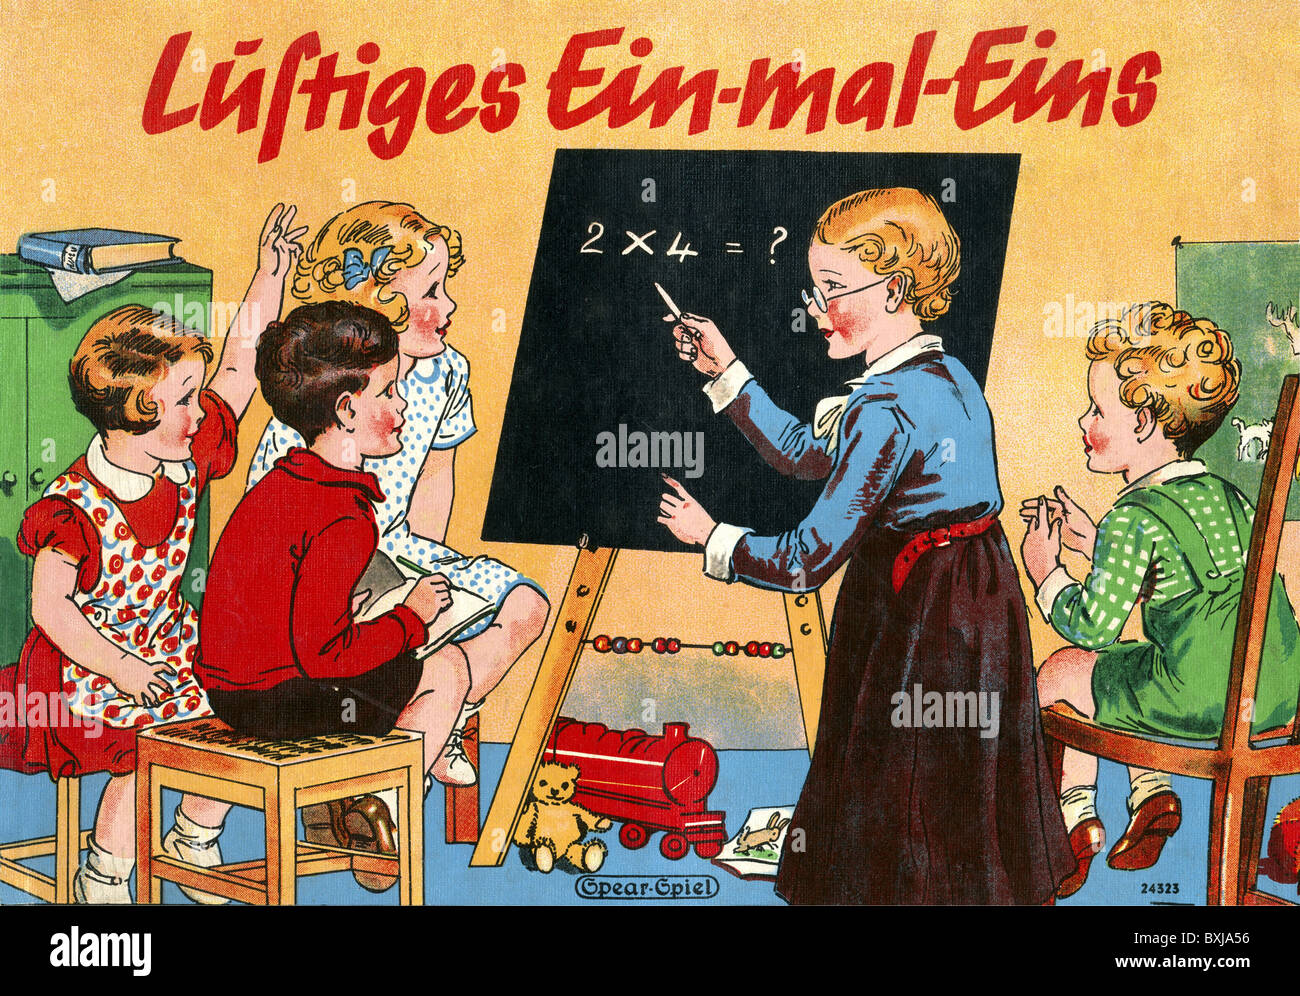 game, parlour games, 'Lustiges Ein Mal Eins' (Funny multiplication table), Germany, circa 1930, Additional-Rights-Clearences-Not Available Stock Photo